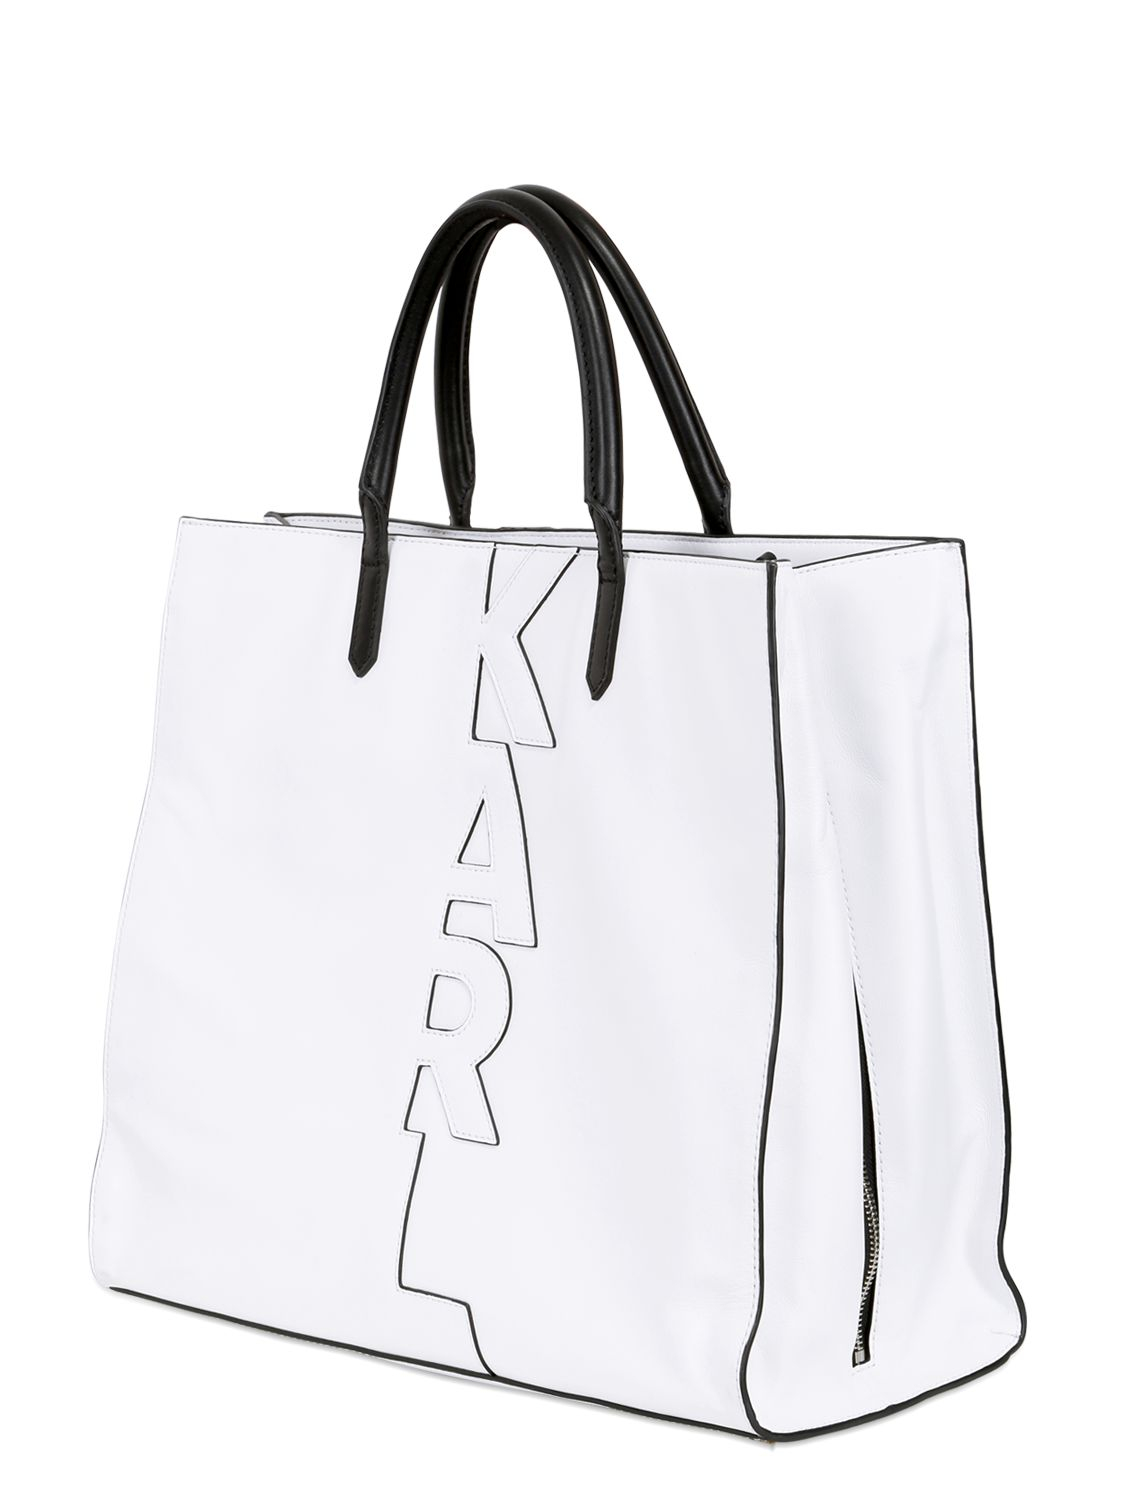 Karl Lagerfeld Karl Cut Out Soft Leather Tote Bag in White - Lyst